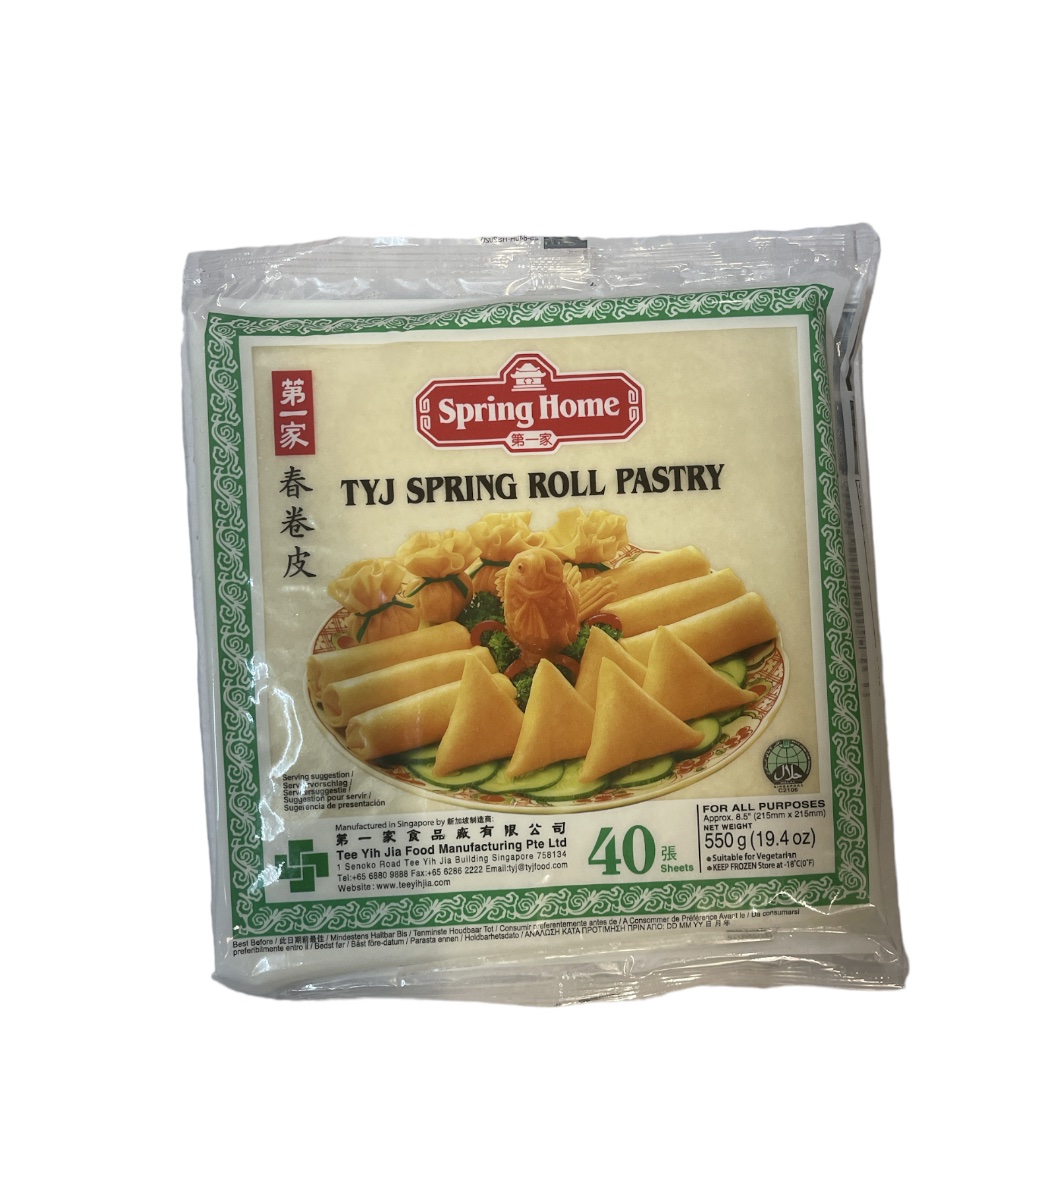 Spring Home TYJ SPRING ROLL PASTRY 40 Sheets 550g